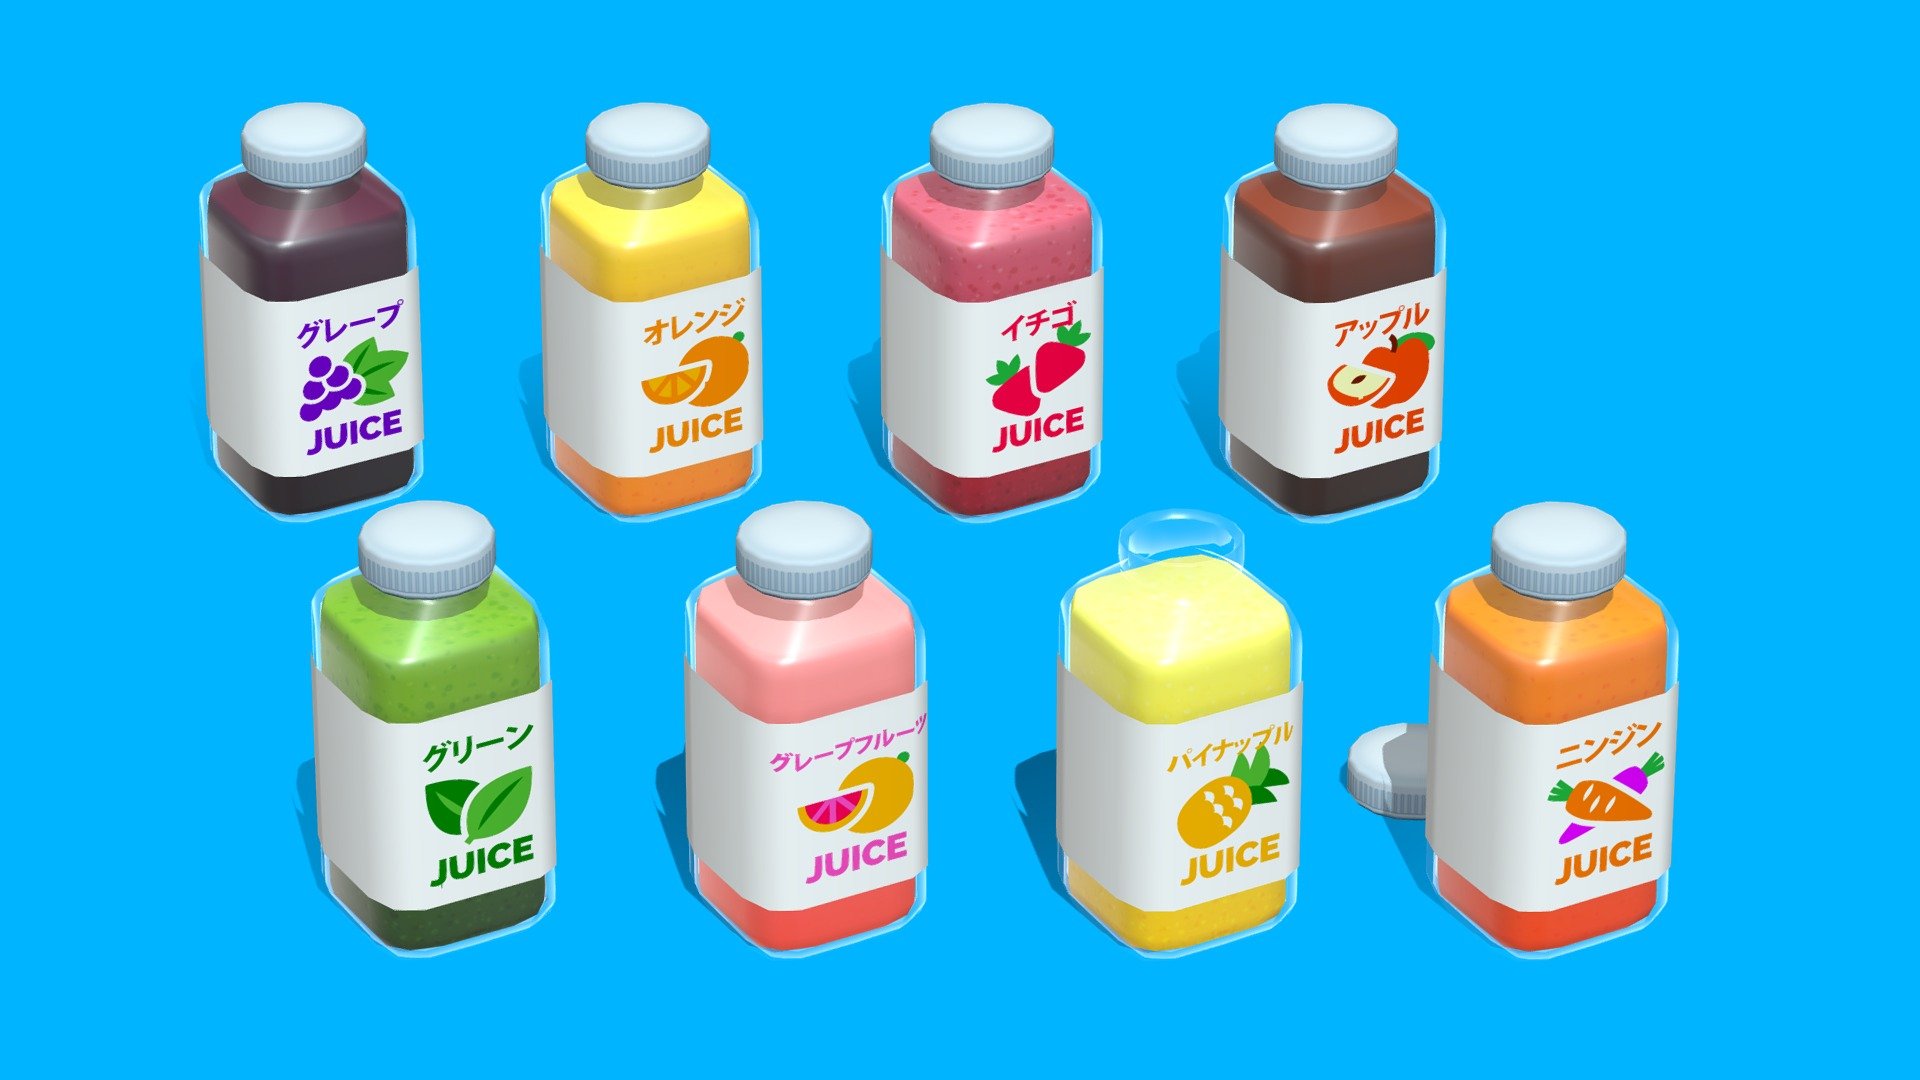 Colorful juice bottles to stock your convenience store with!




One model, 8 unique flavours to choose from: grape, orange, strawberry, apple, grapefruit, pineapple, carrot and supergreens

The juice bottle asset is fully modular and interchangeable with 4 different components -plastic bottle, label, liquid and bottle cap

1024x1024 textures

Modeled in Maya and painted in Photoshop.

While you’re here make sure to check out my other assets! Every asset is modeled and painted in the same style so your game or project will maintain a cohesive and unique style with a wide variety of assets to choose from! - Juice Bottles - Buy Royalty Free 3D model by Megan Alcock (@citystreetlight) 3d model